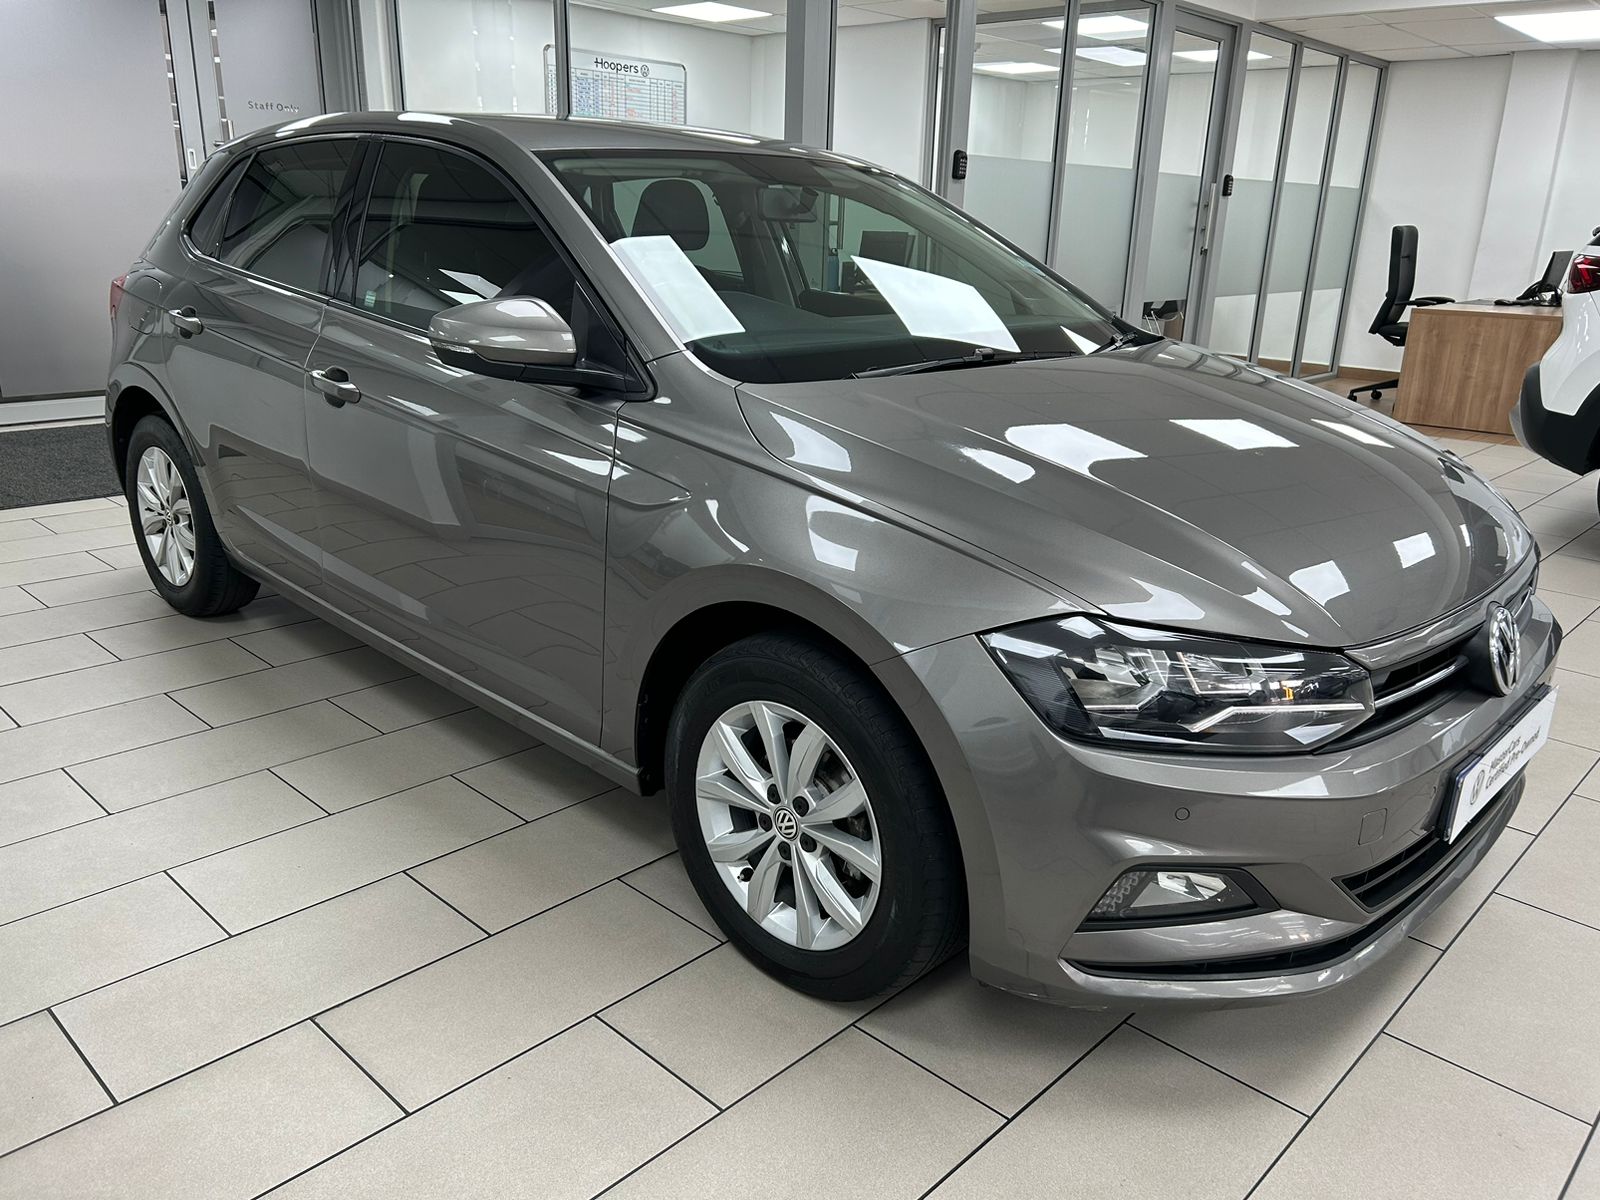 2019 Volkswagen Polo Hatch  for sale - 08795